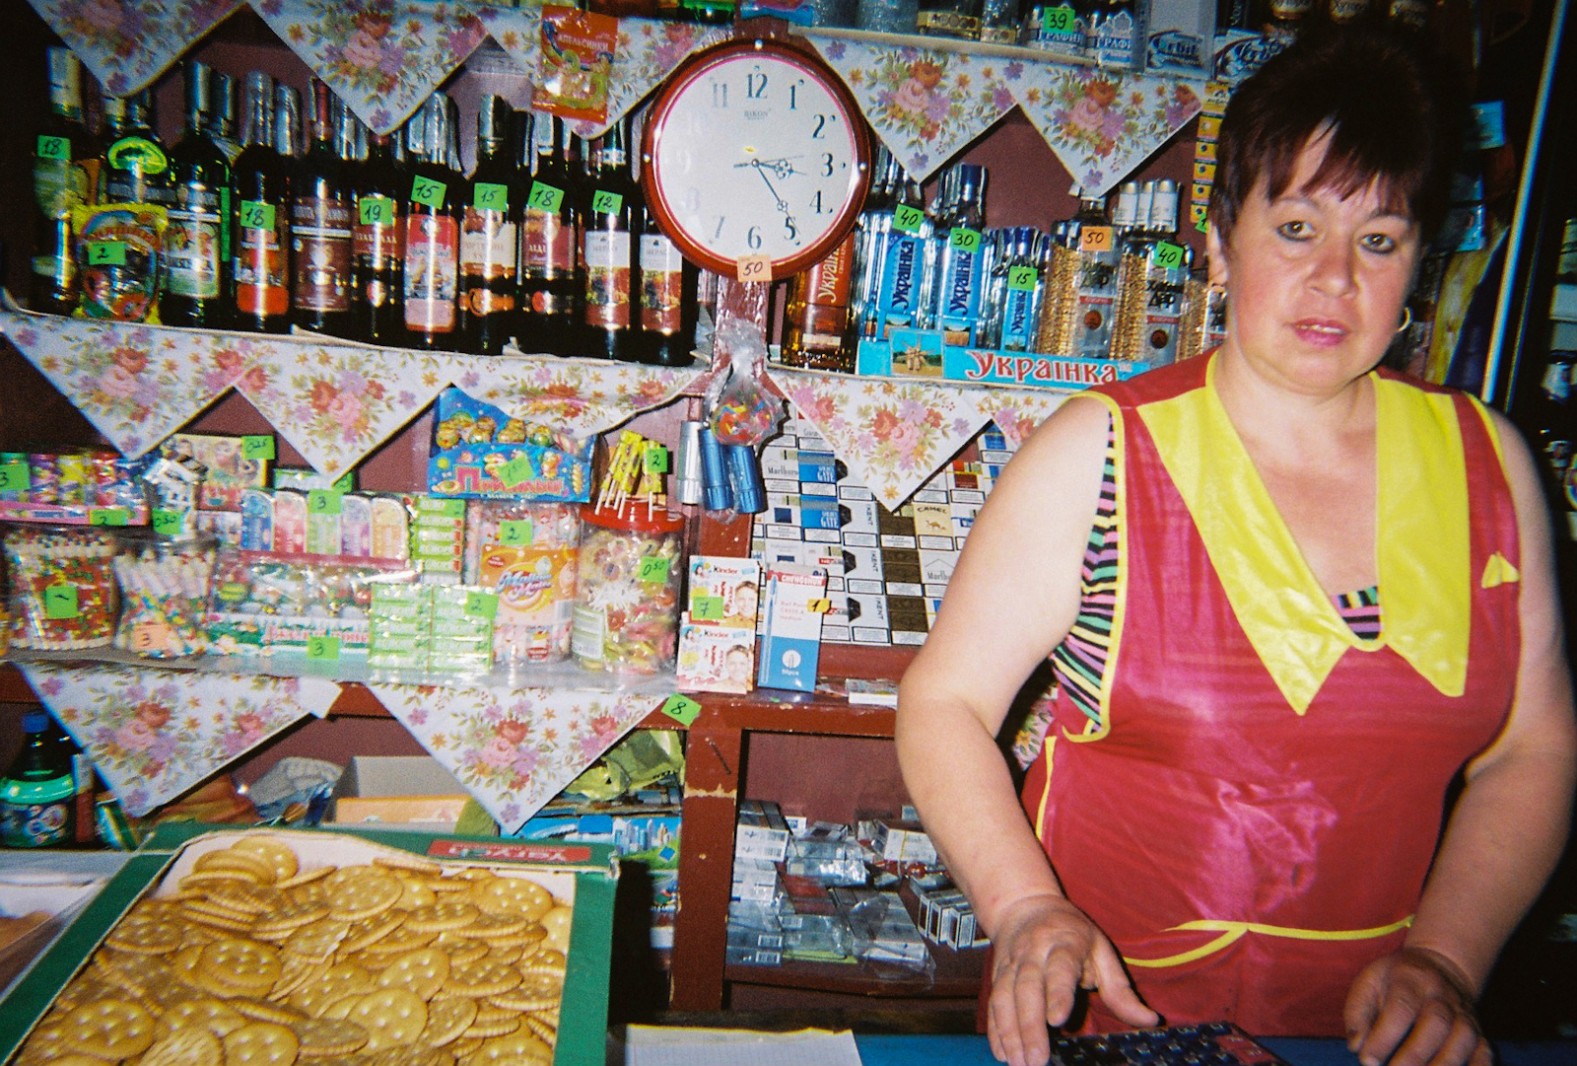 The local store in a village near Chernobyl